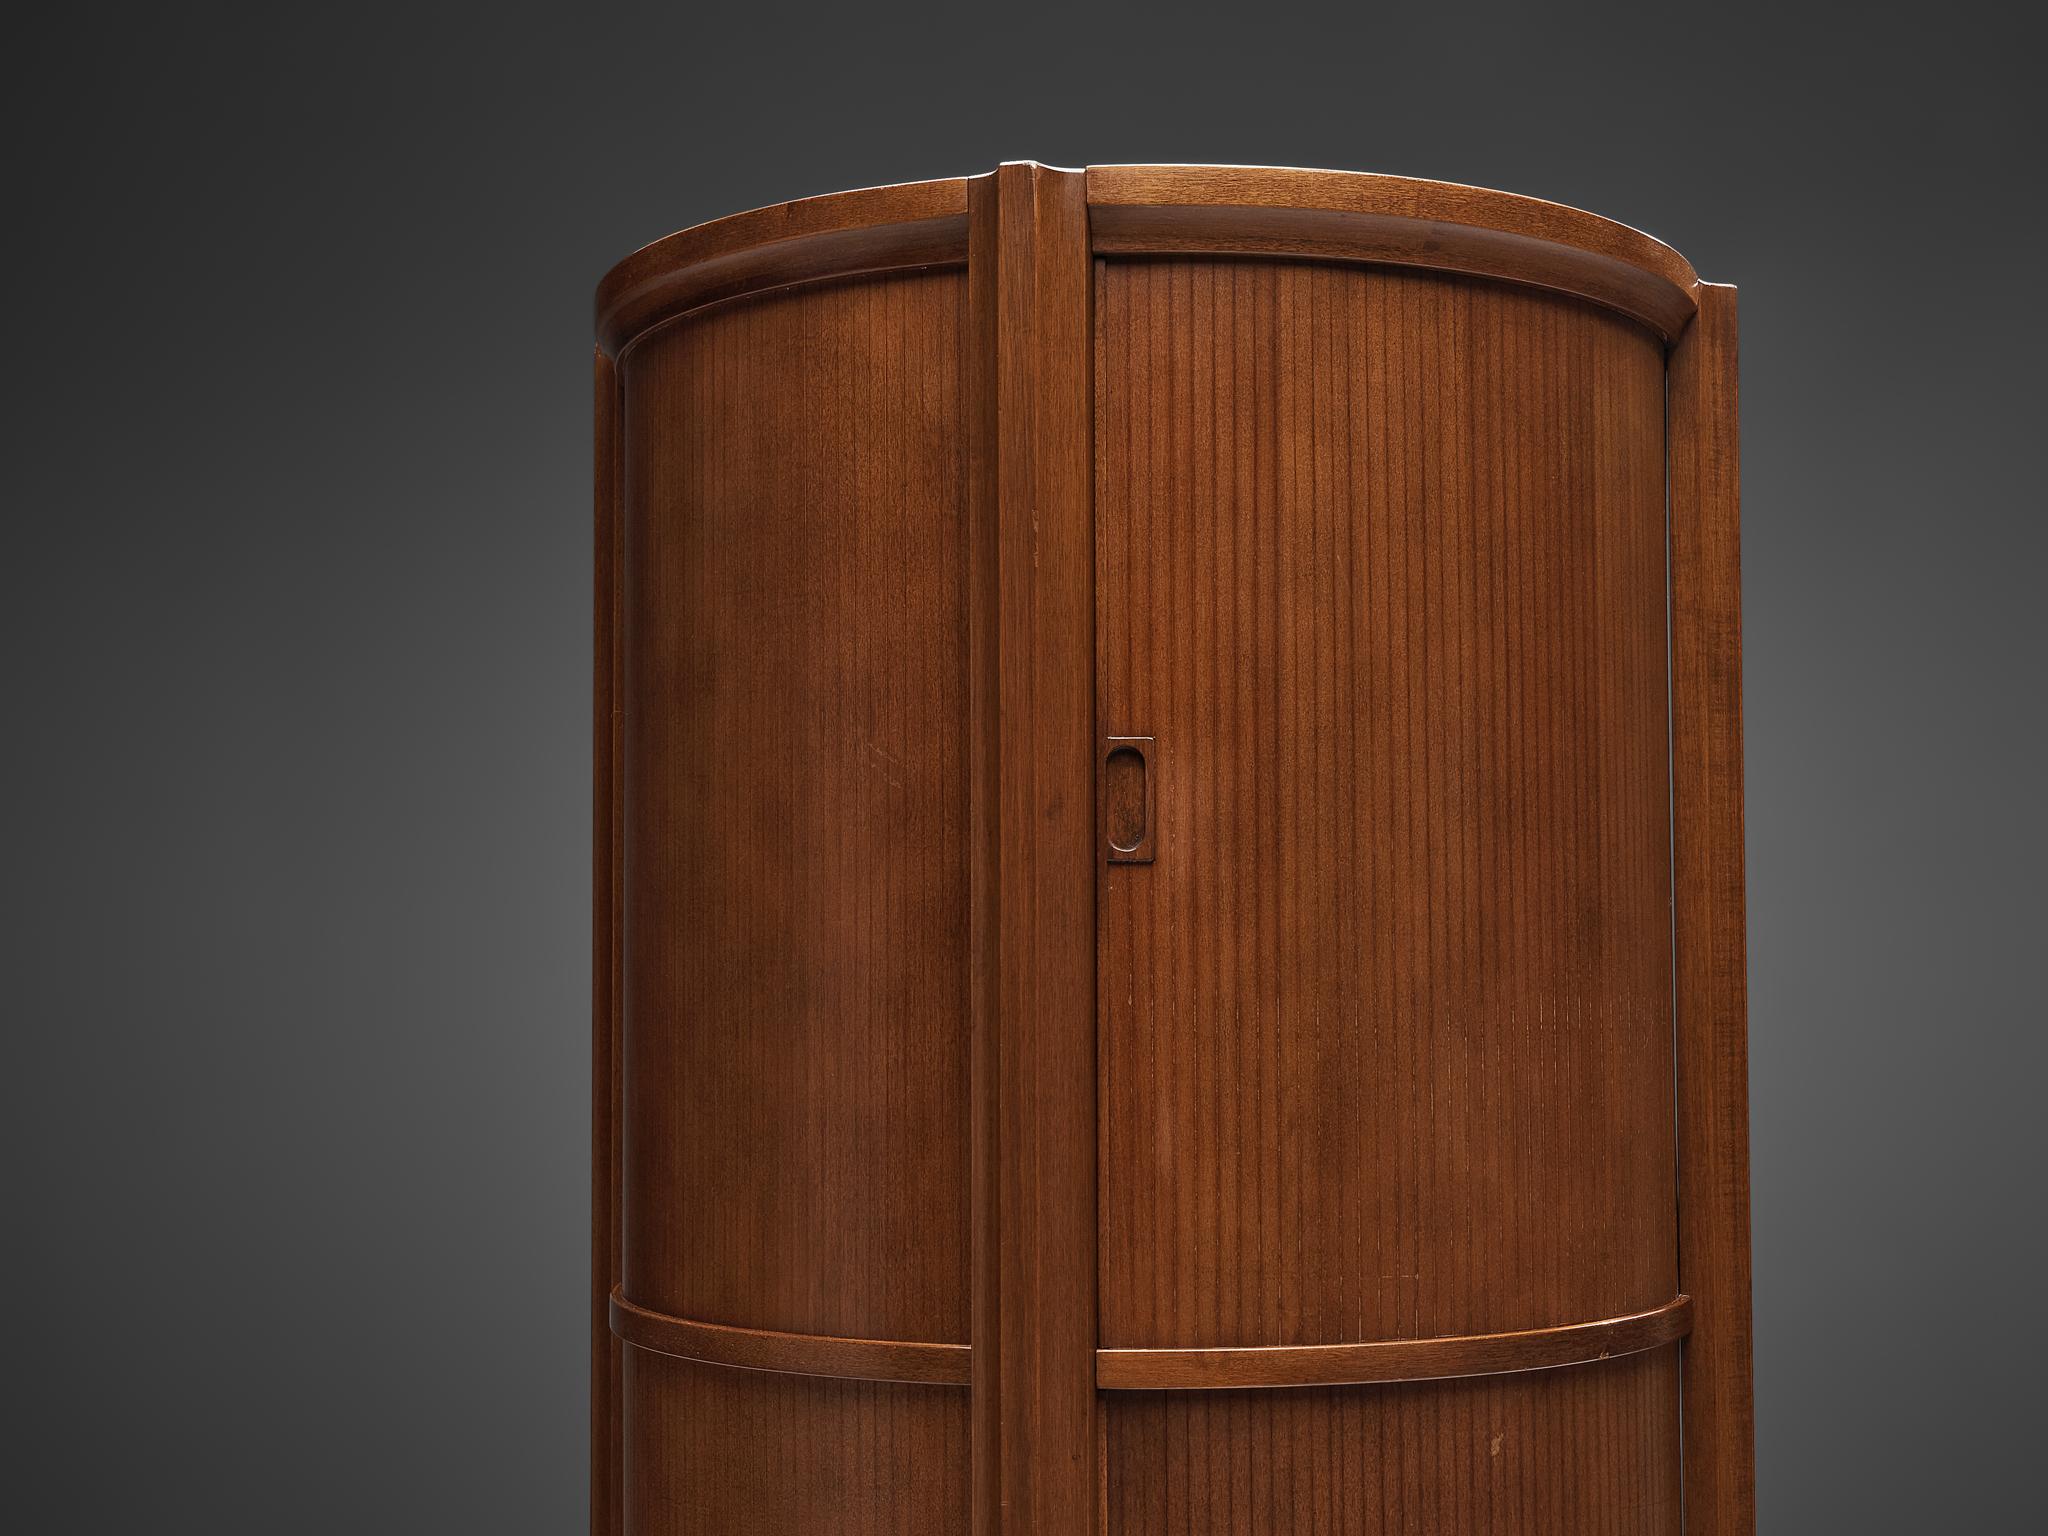 Circular cabinet, walnut, metal, Italy, 1950s

Free-standing cabinet or bookcase in circular shape. Three levels with shelves allow you to showcase your chosen belongings. Each level is equipped with sliding doors that can close up the cabinet.